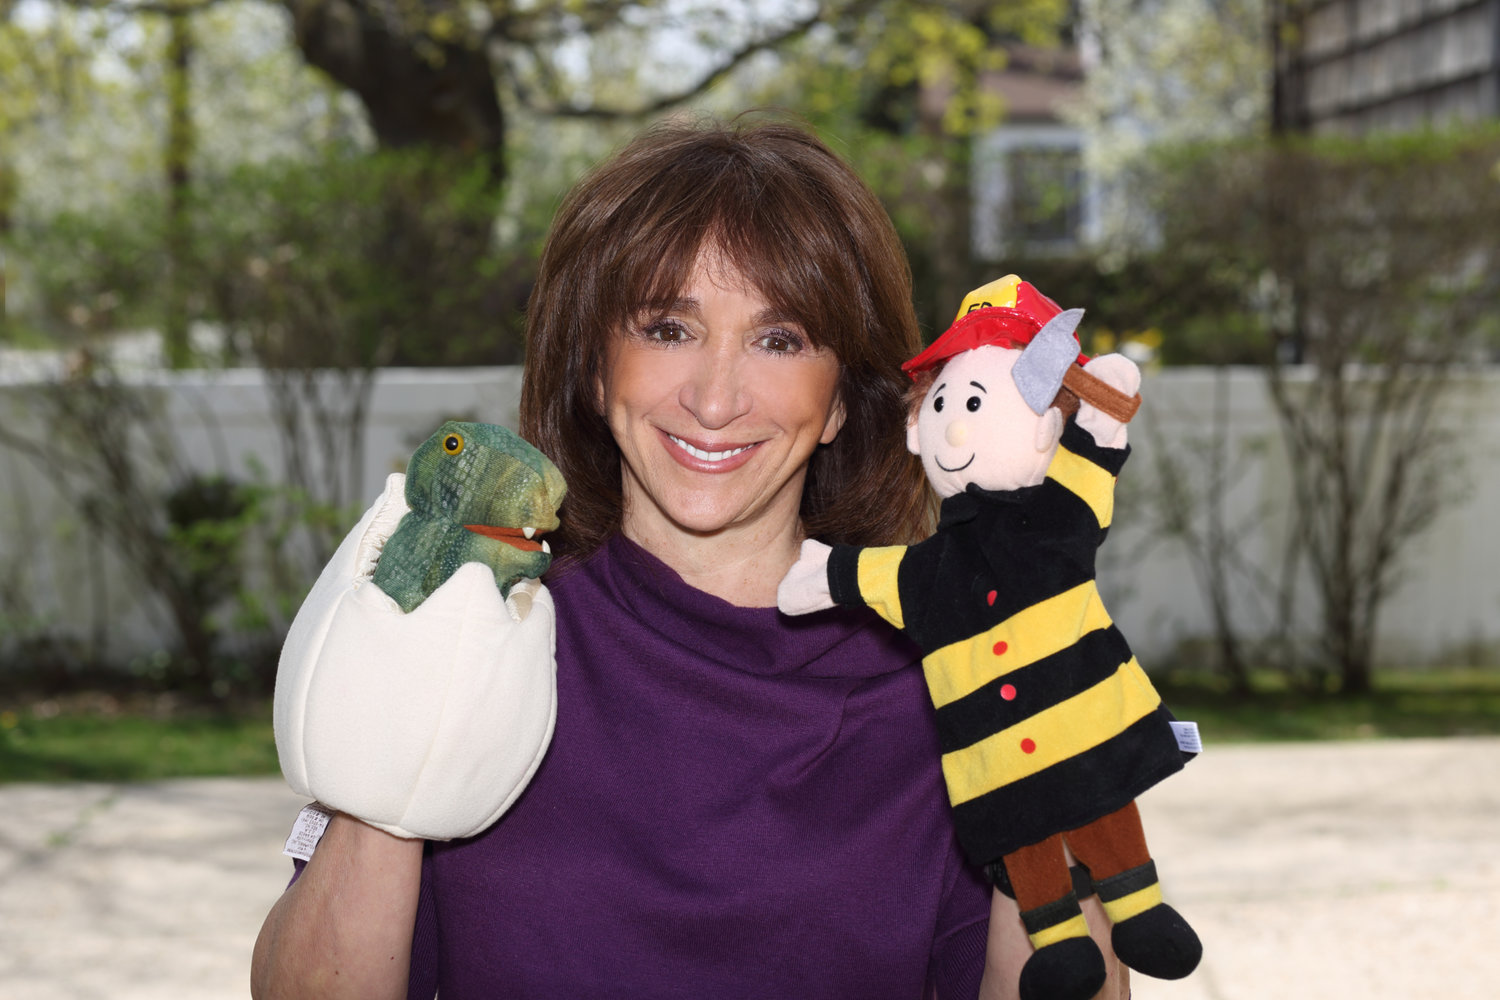 Cedarhurst child psychologist Dr. Laurie Zelinger with the puppets she uses when counseling children.